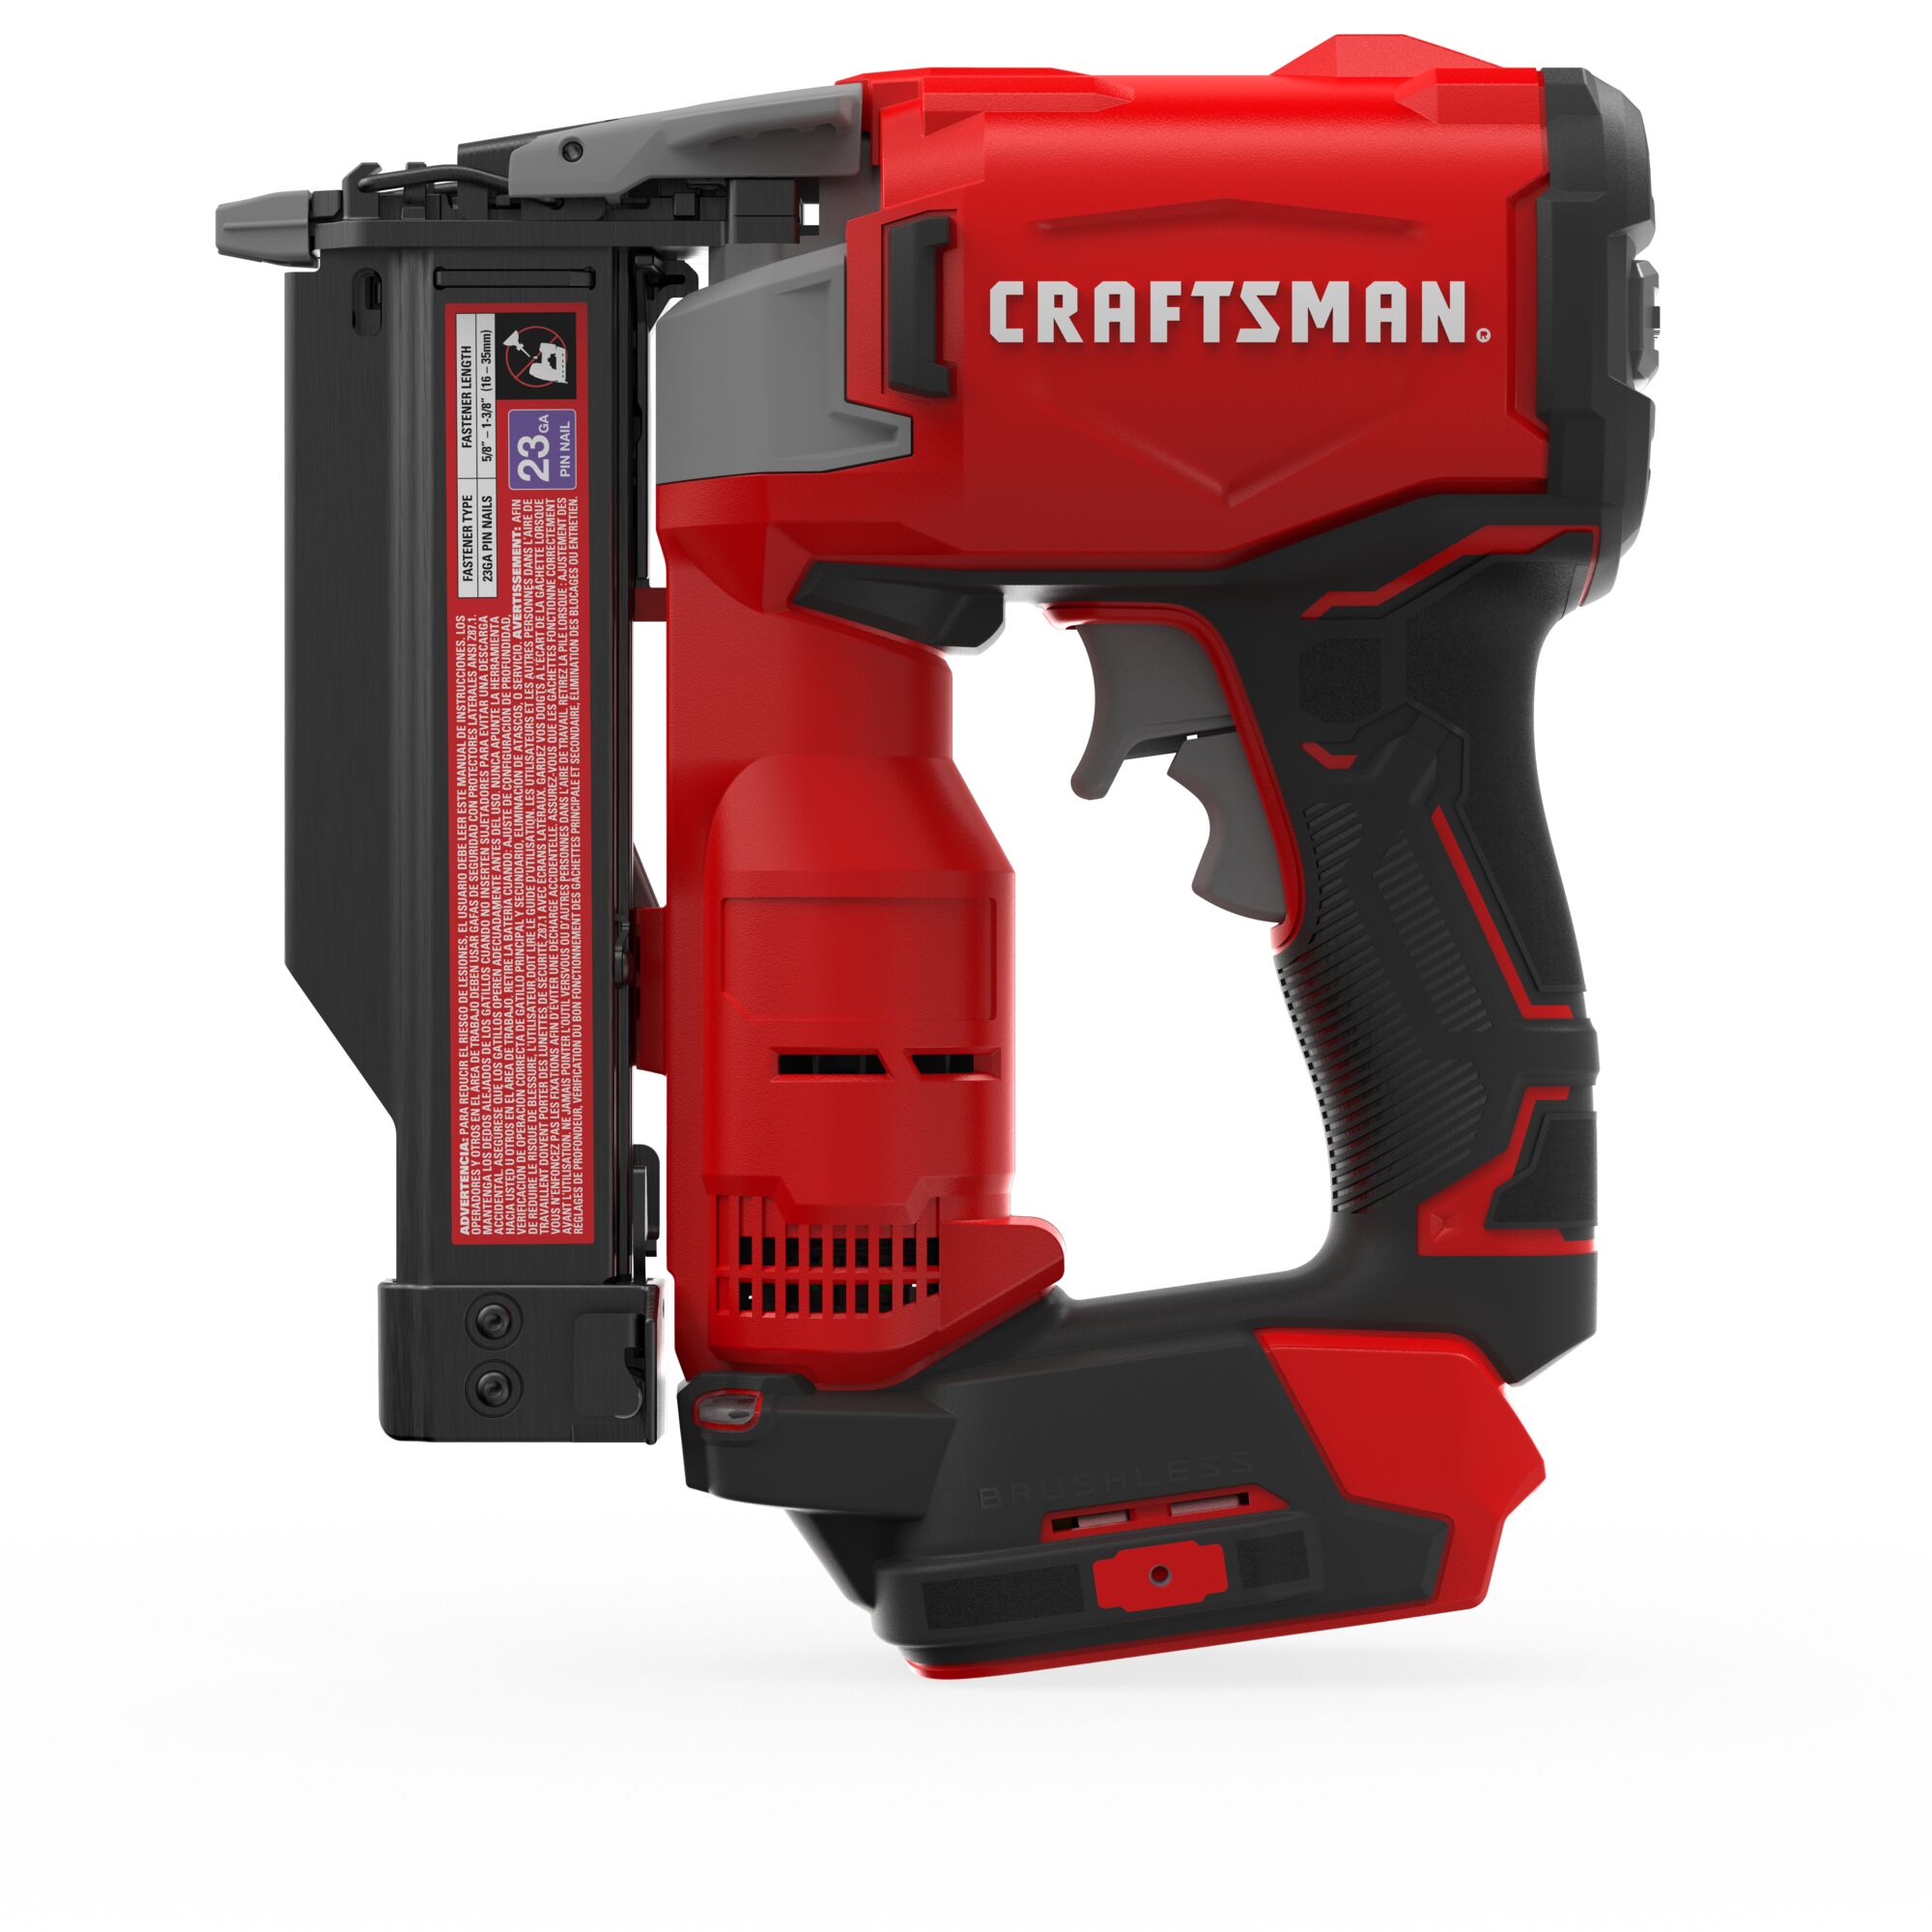 CRAFTSMAN V20 BRUSHLESS RP 23 guage pin nailer in use - battery sold separately 